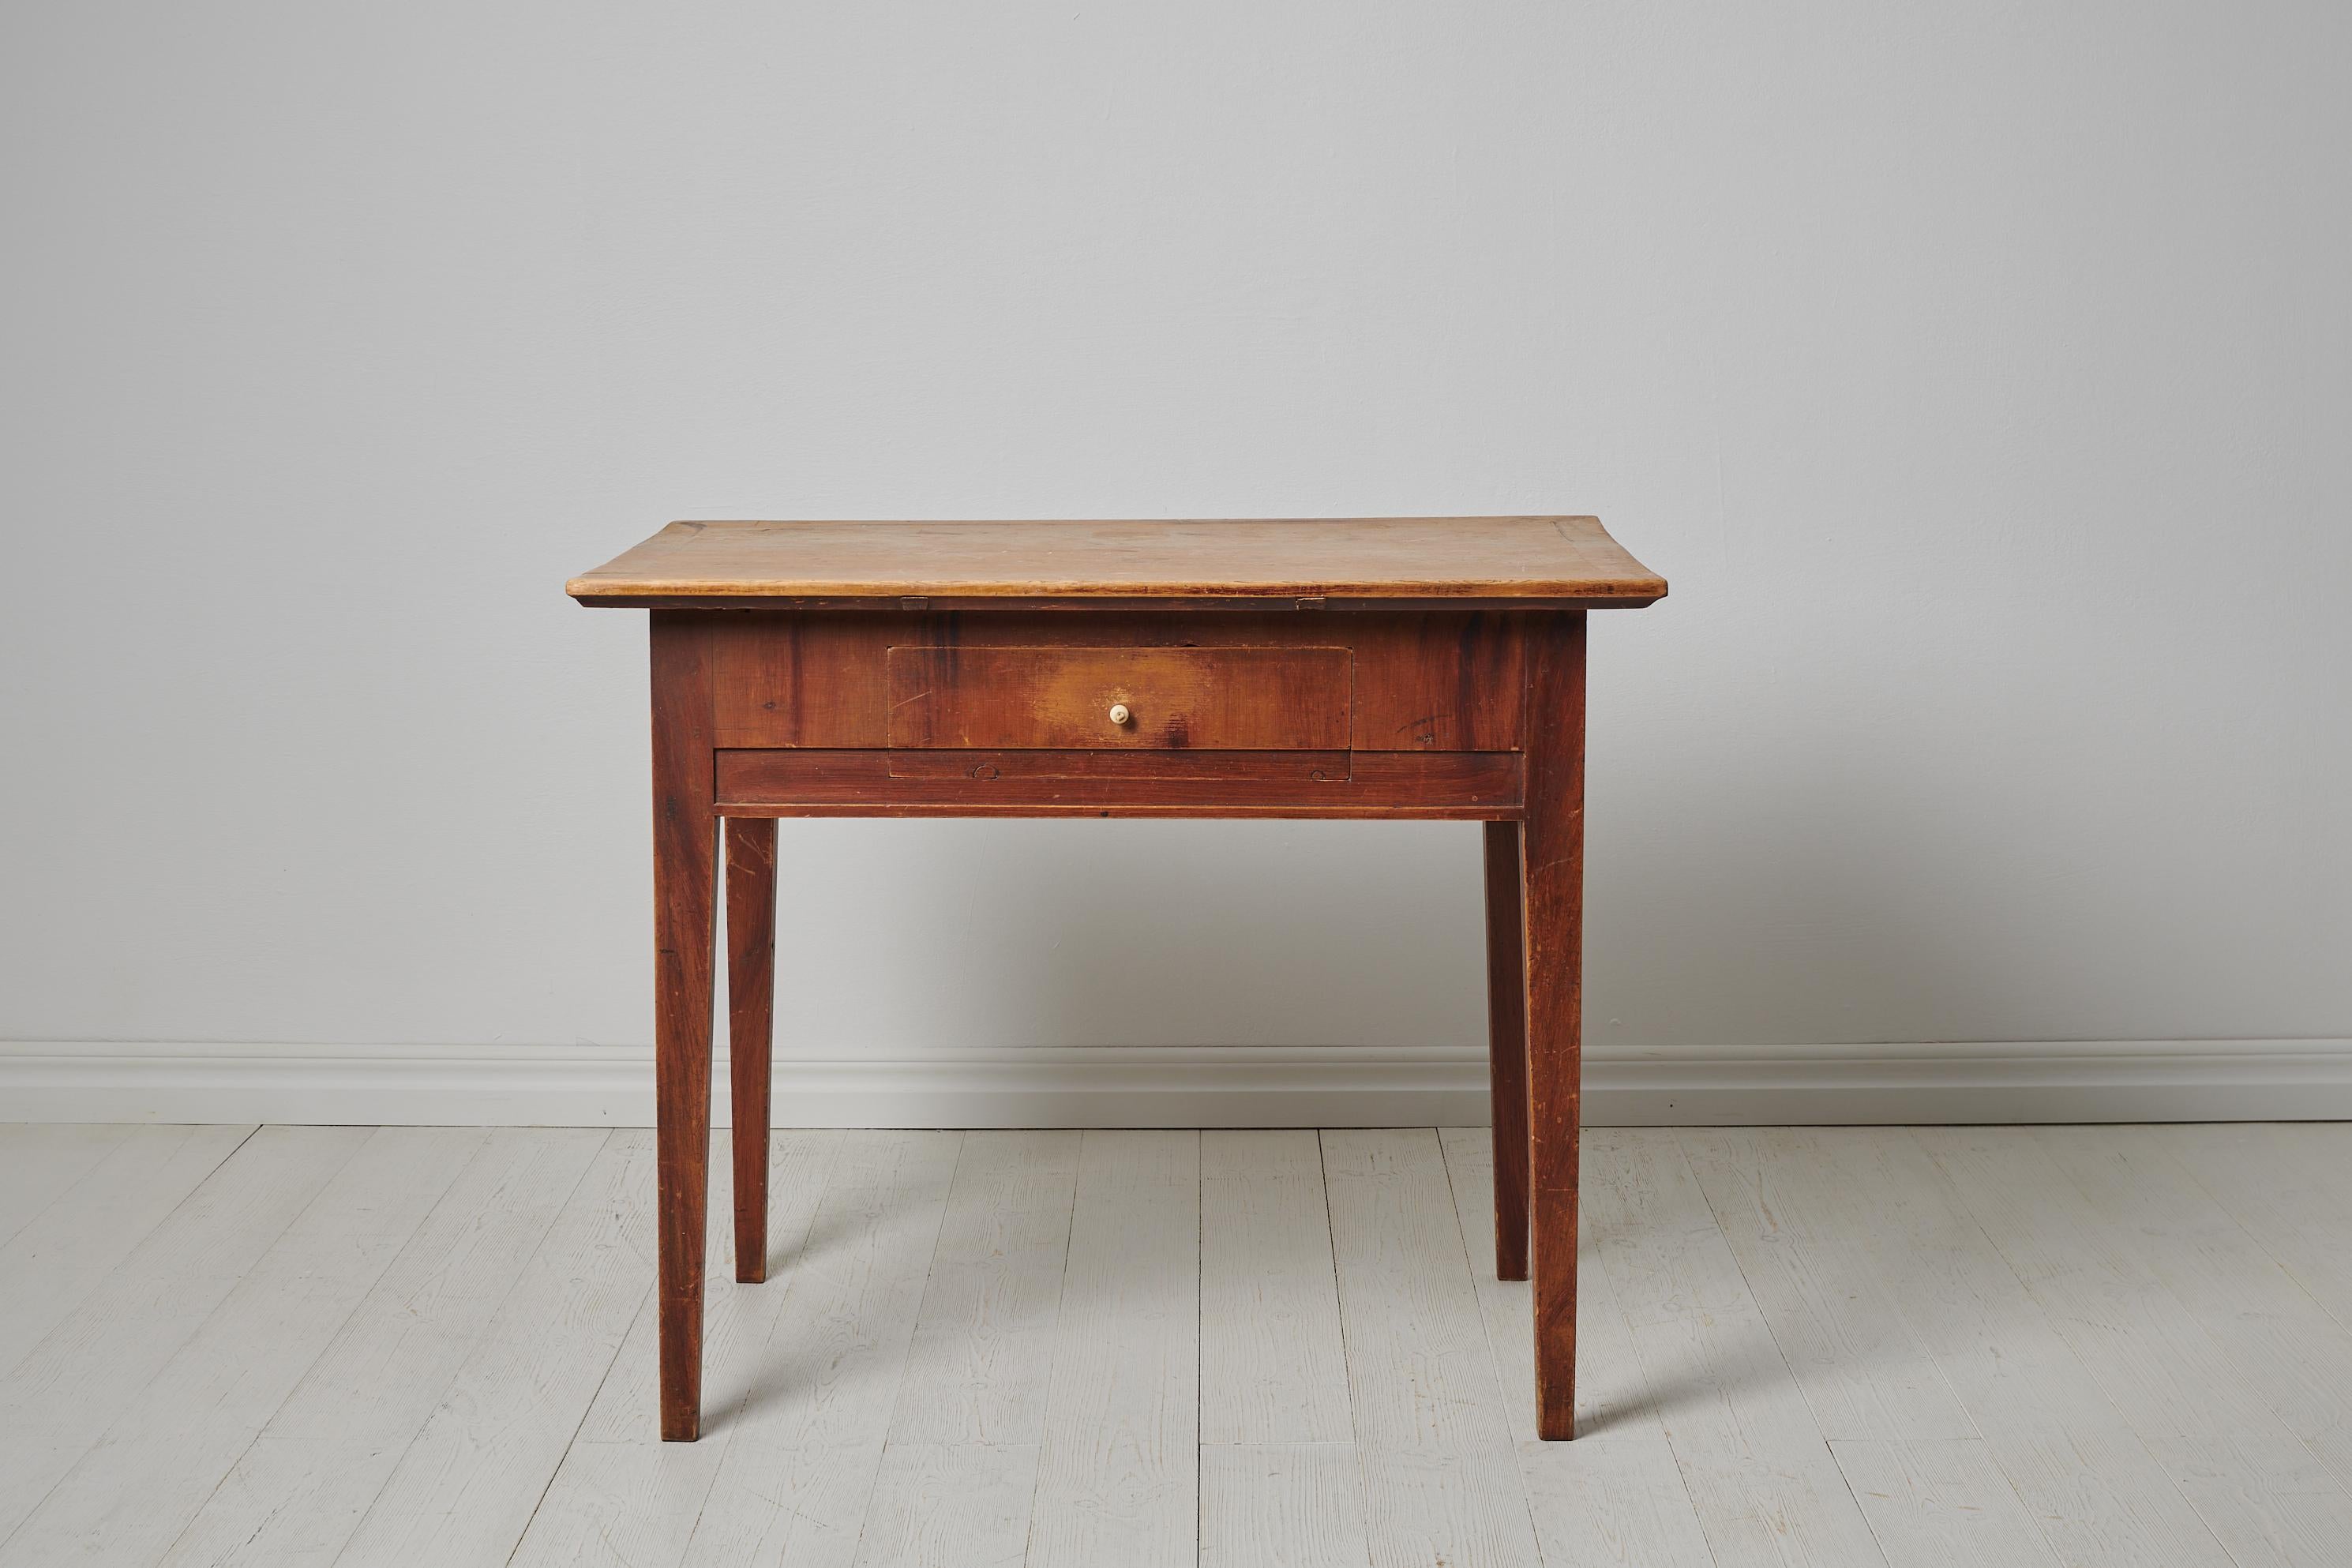 Folk art country table from northern Sweden made around 1820 to 1840 in pine. The table is an authentic Swedish country antique in untouched original condition. The faux paint is original to the table. The table is in good vintage condition